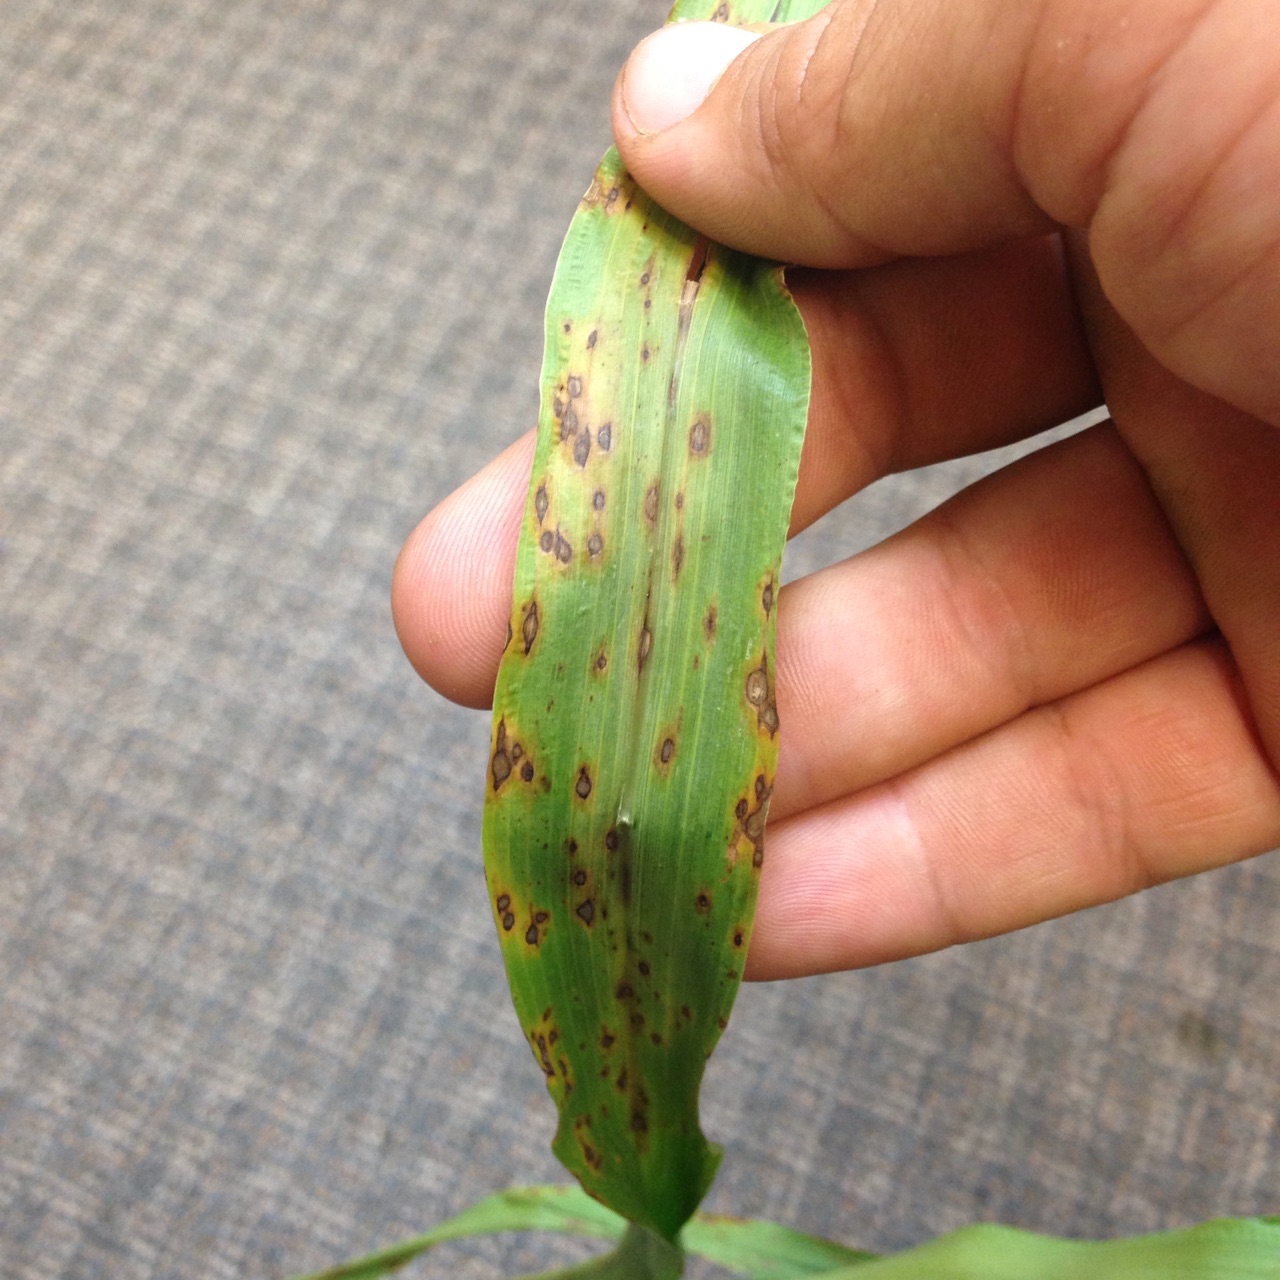 A sorghum leaf is covered in spots with gray centers and reddish brown margins